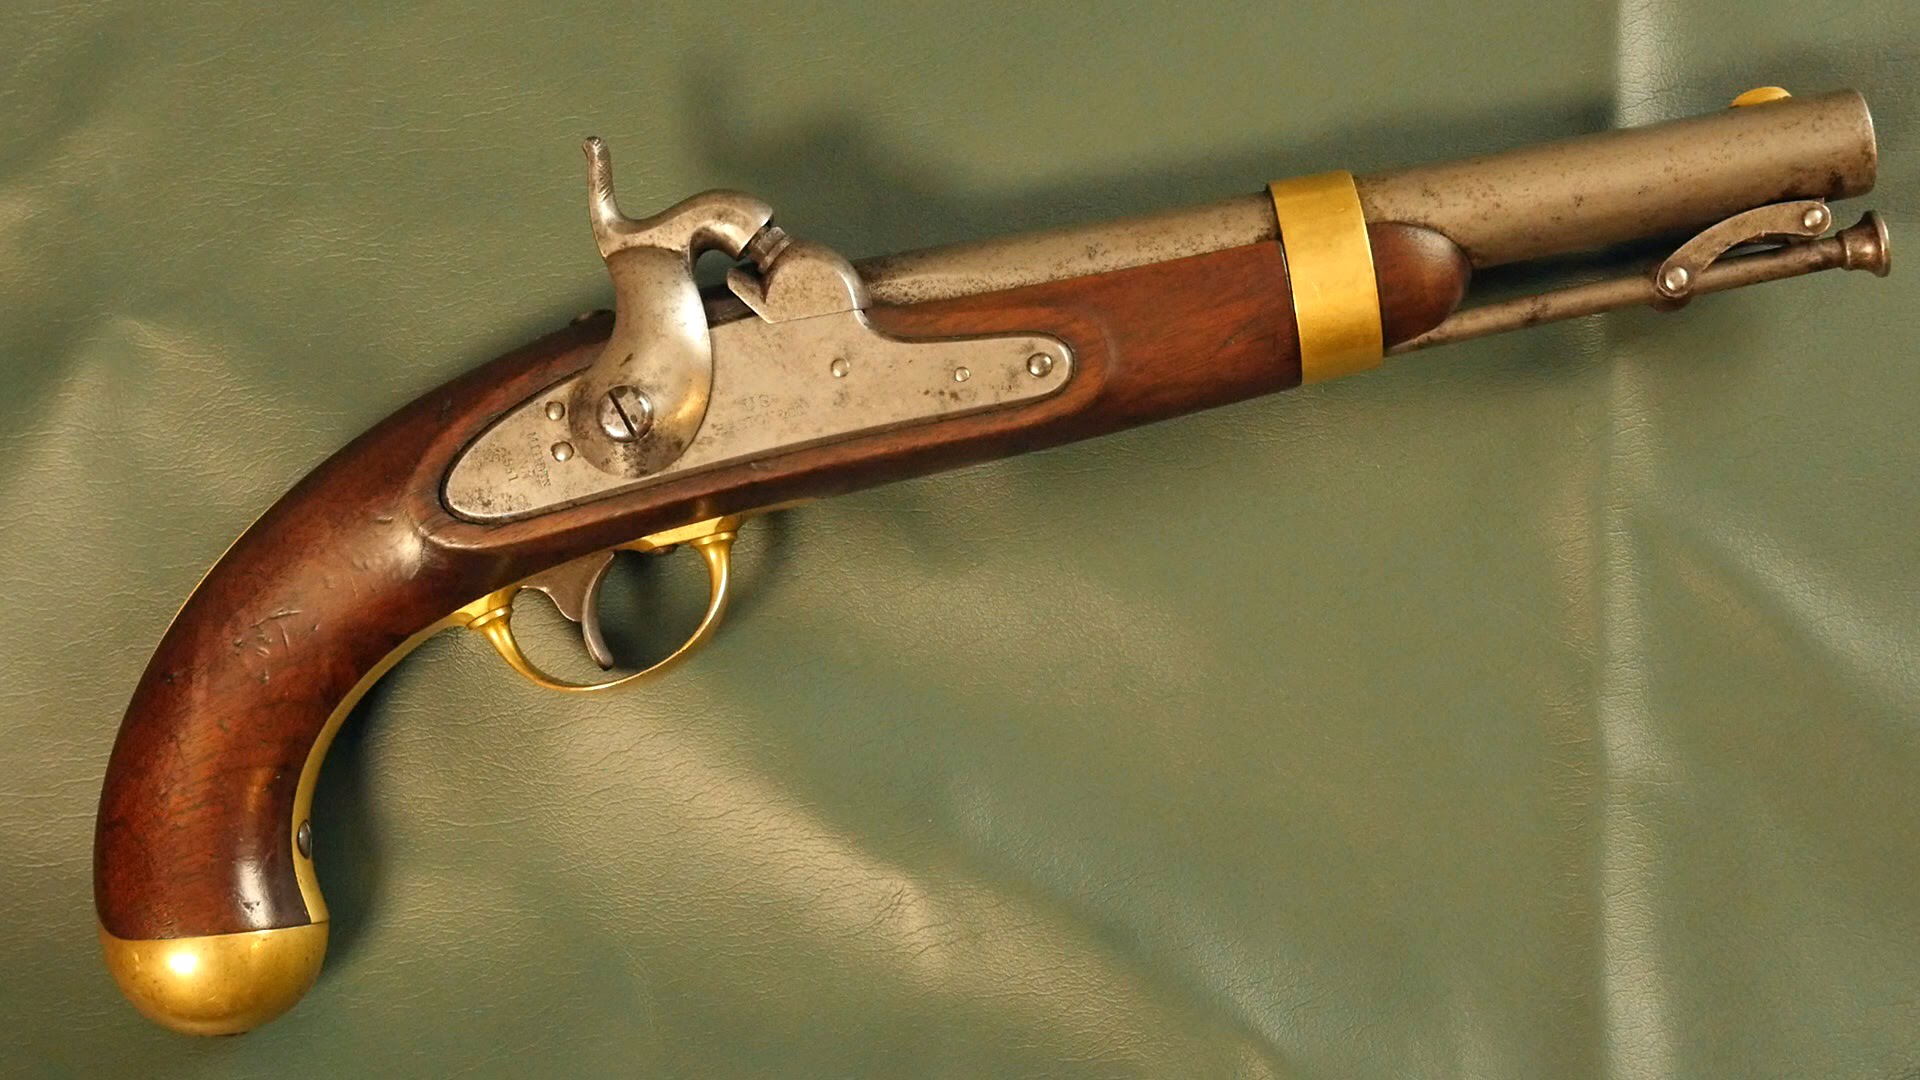 Showing and firing an antique percussion pistol (Aston 1842) - YouTube